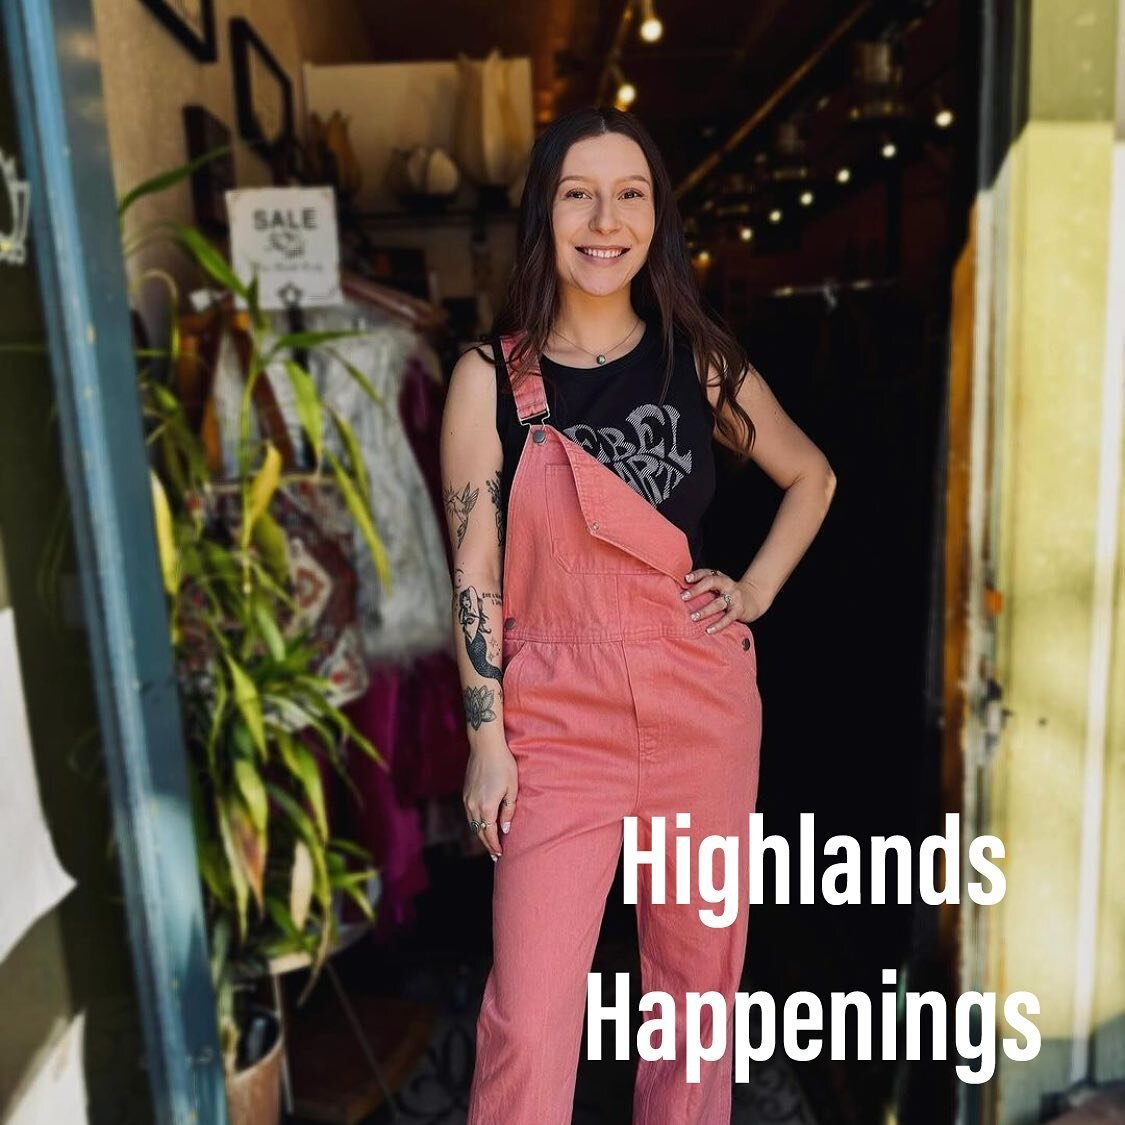 It&rsquo;s another round of Highlands Happenings, and plenty going on in the neighborhood this week!

If you&rsquo;re ready for spring, @thesolshine has you covered, because it&rsquo;s officially overall season with solids and prints in the shop!

Ha